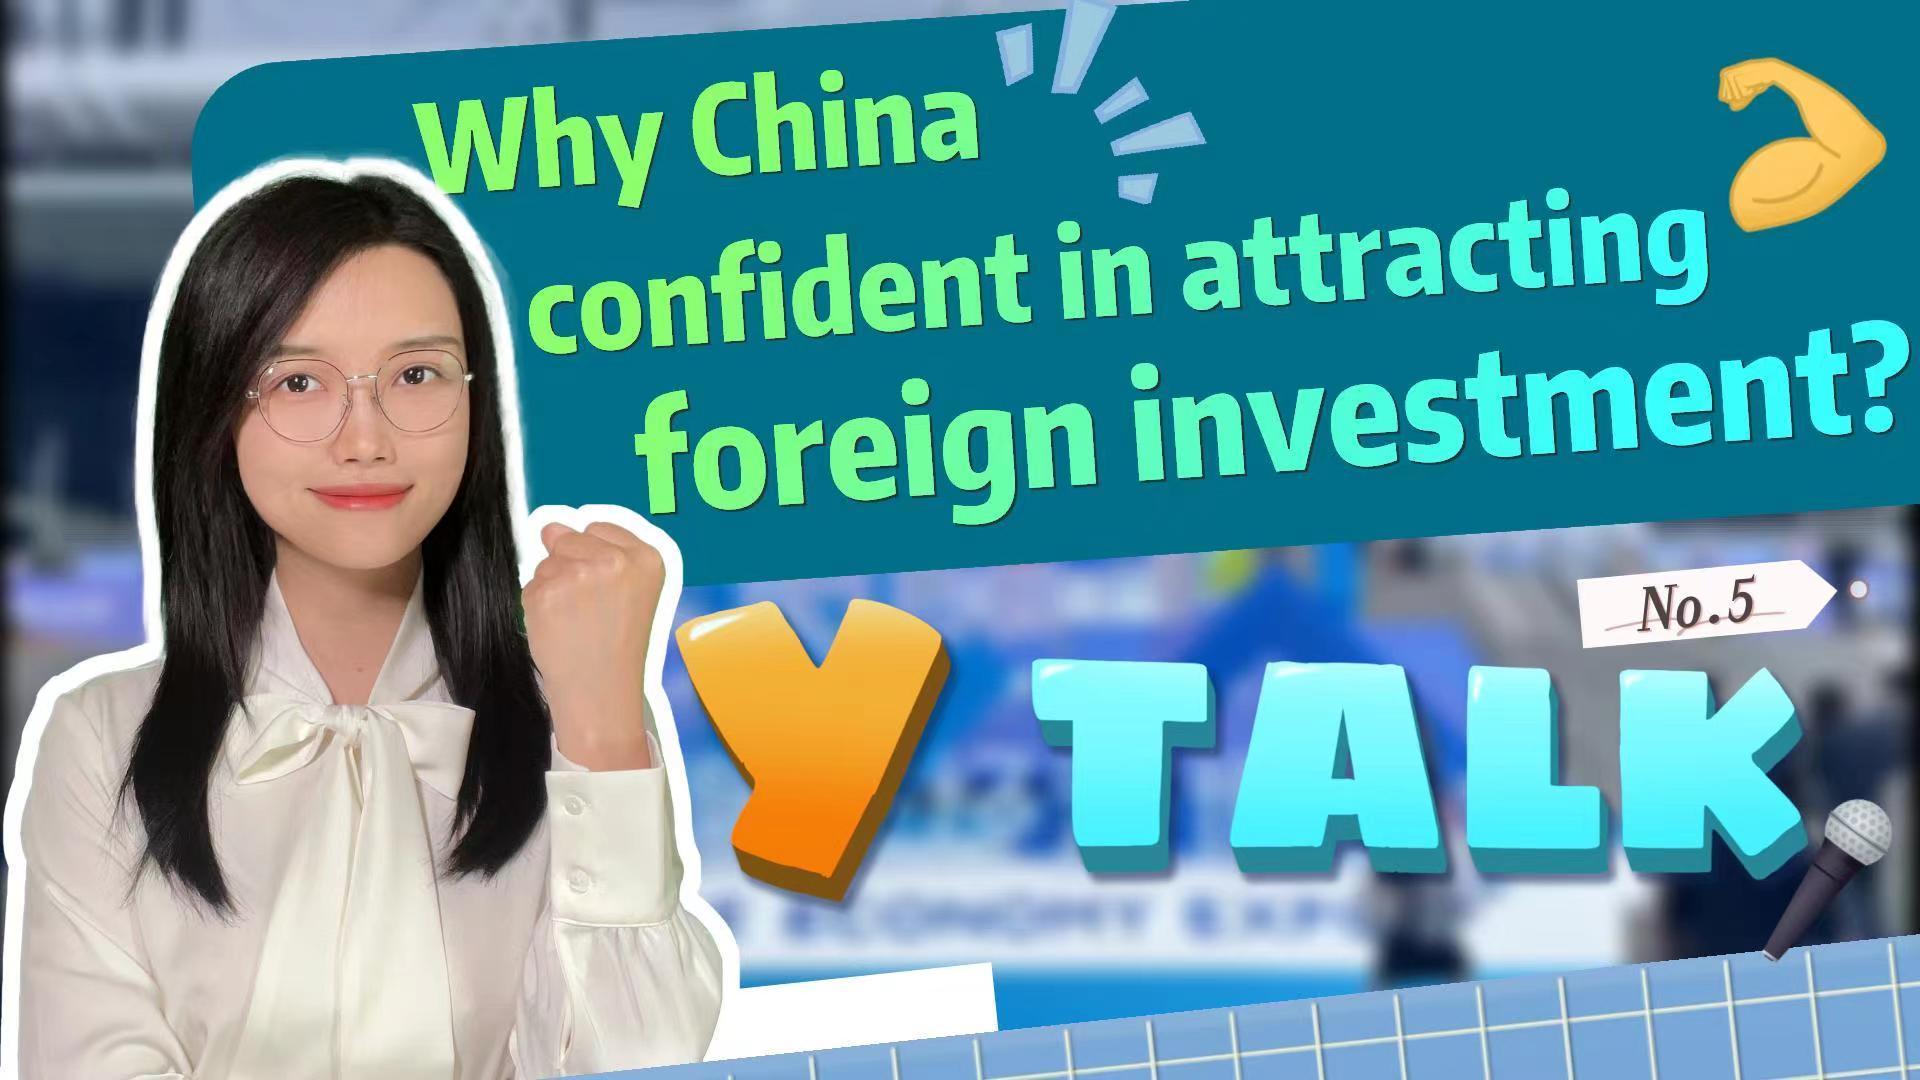 Y Talk⑤｜Why China confident in attracting foreign investment? 吸引外资，中国充满信心